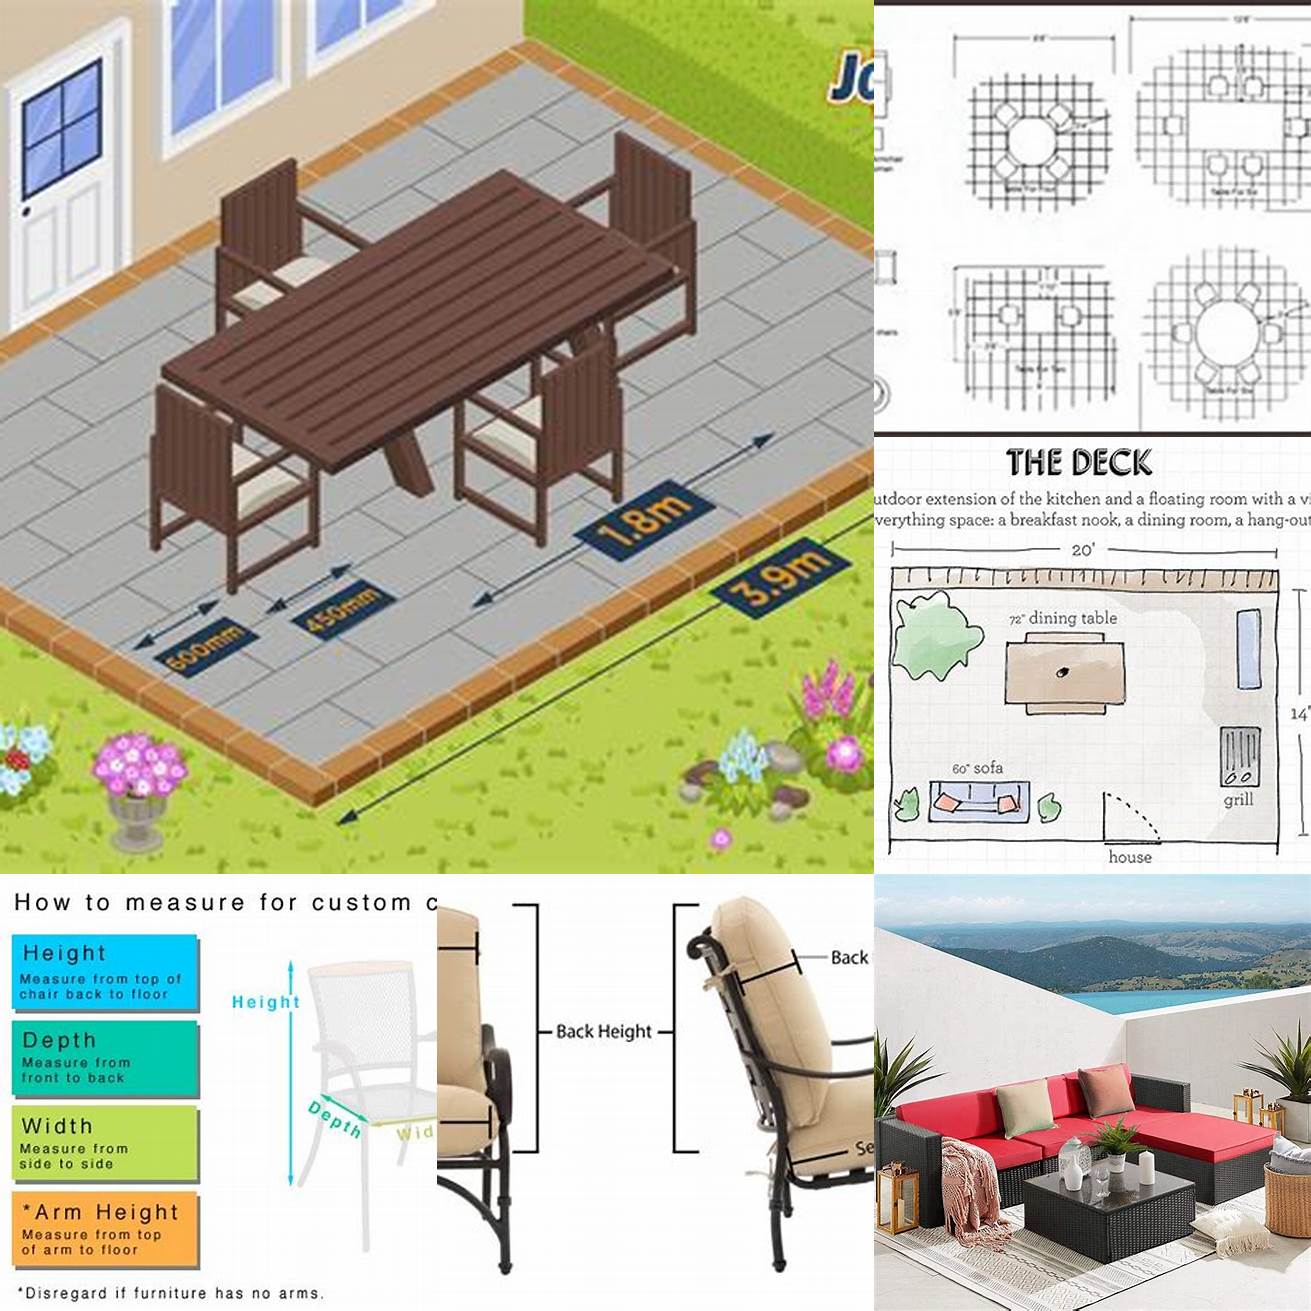 Measure the size of your patio area to determine the size of furniture sets that will fit